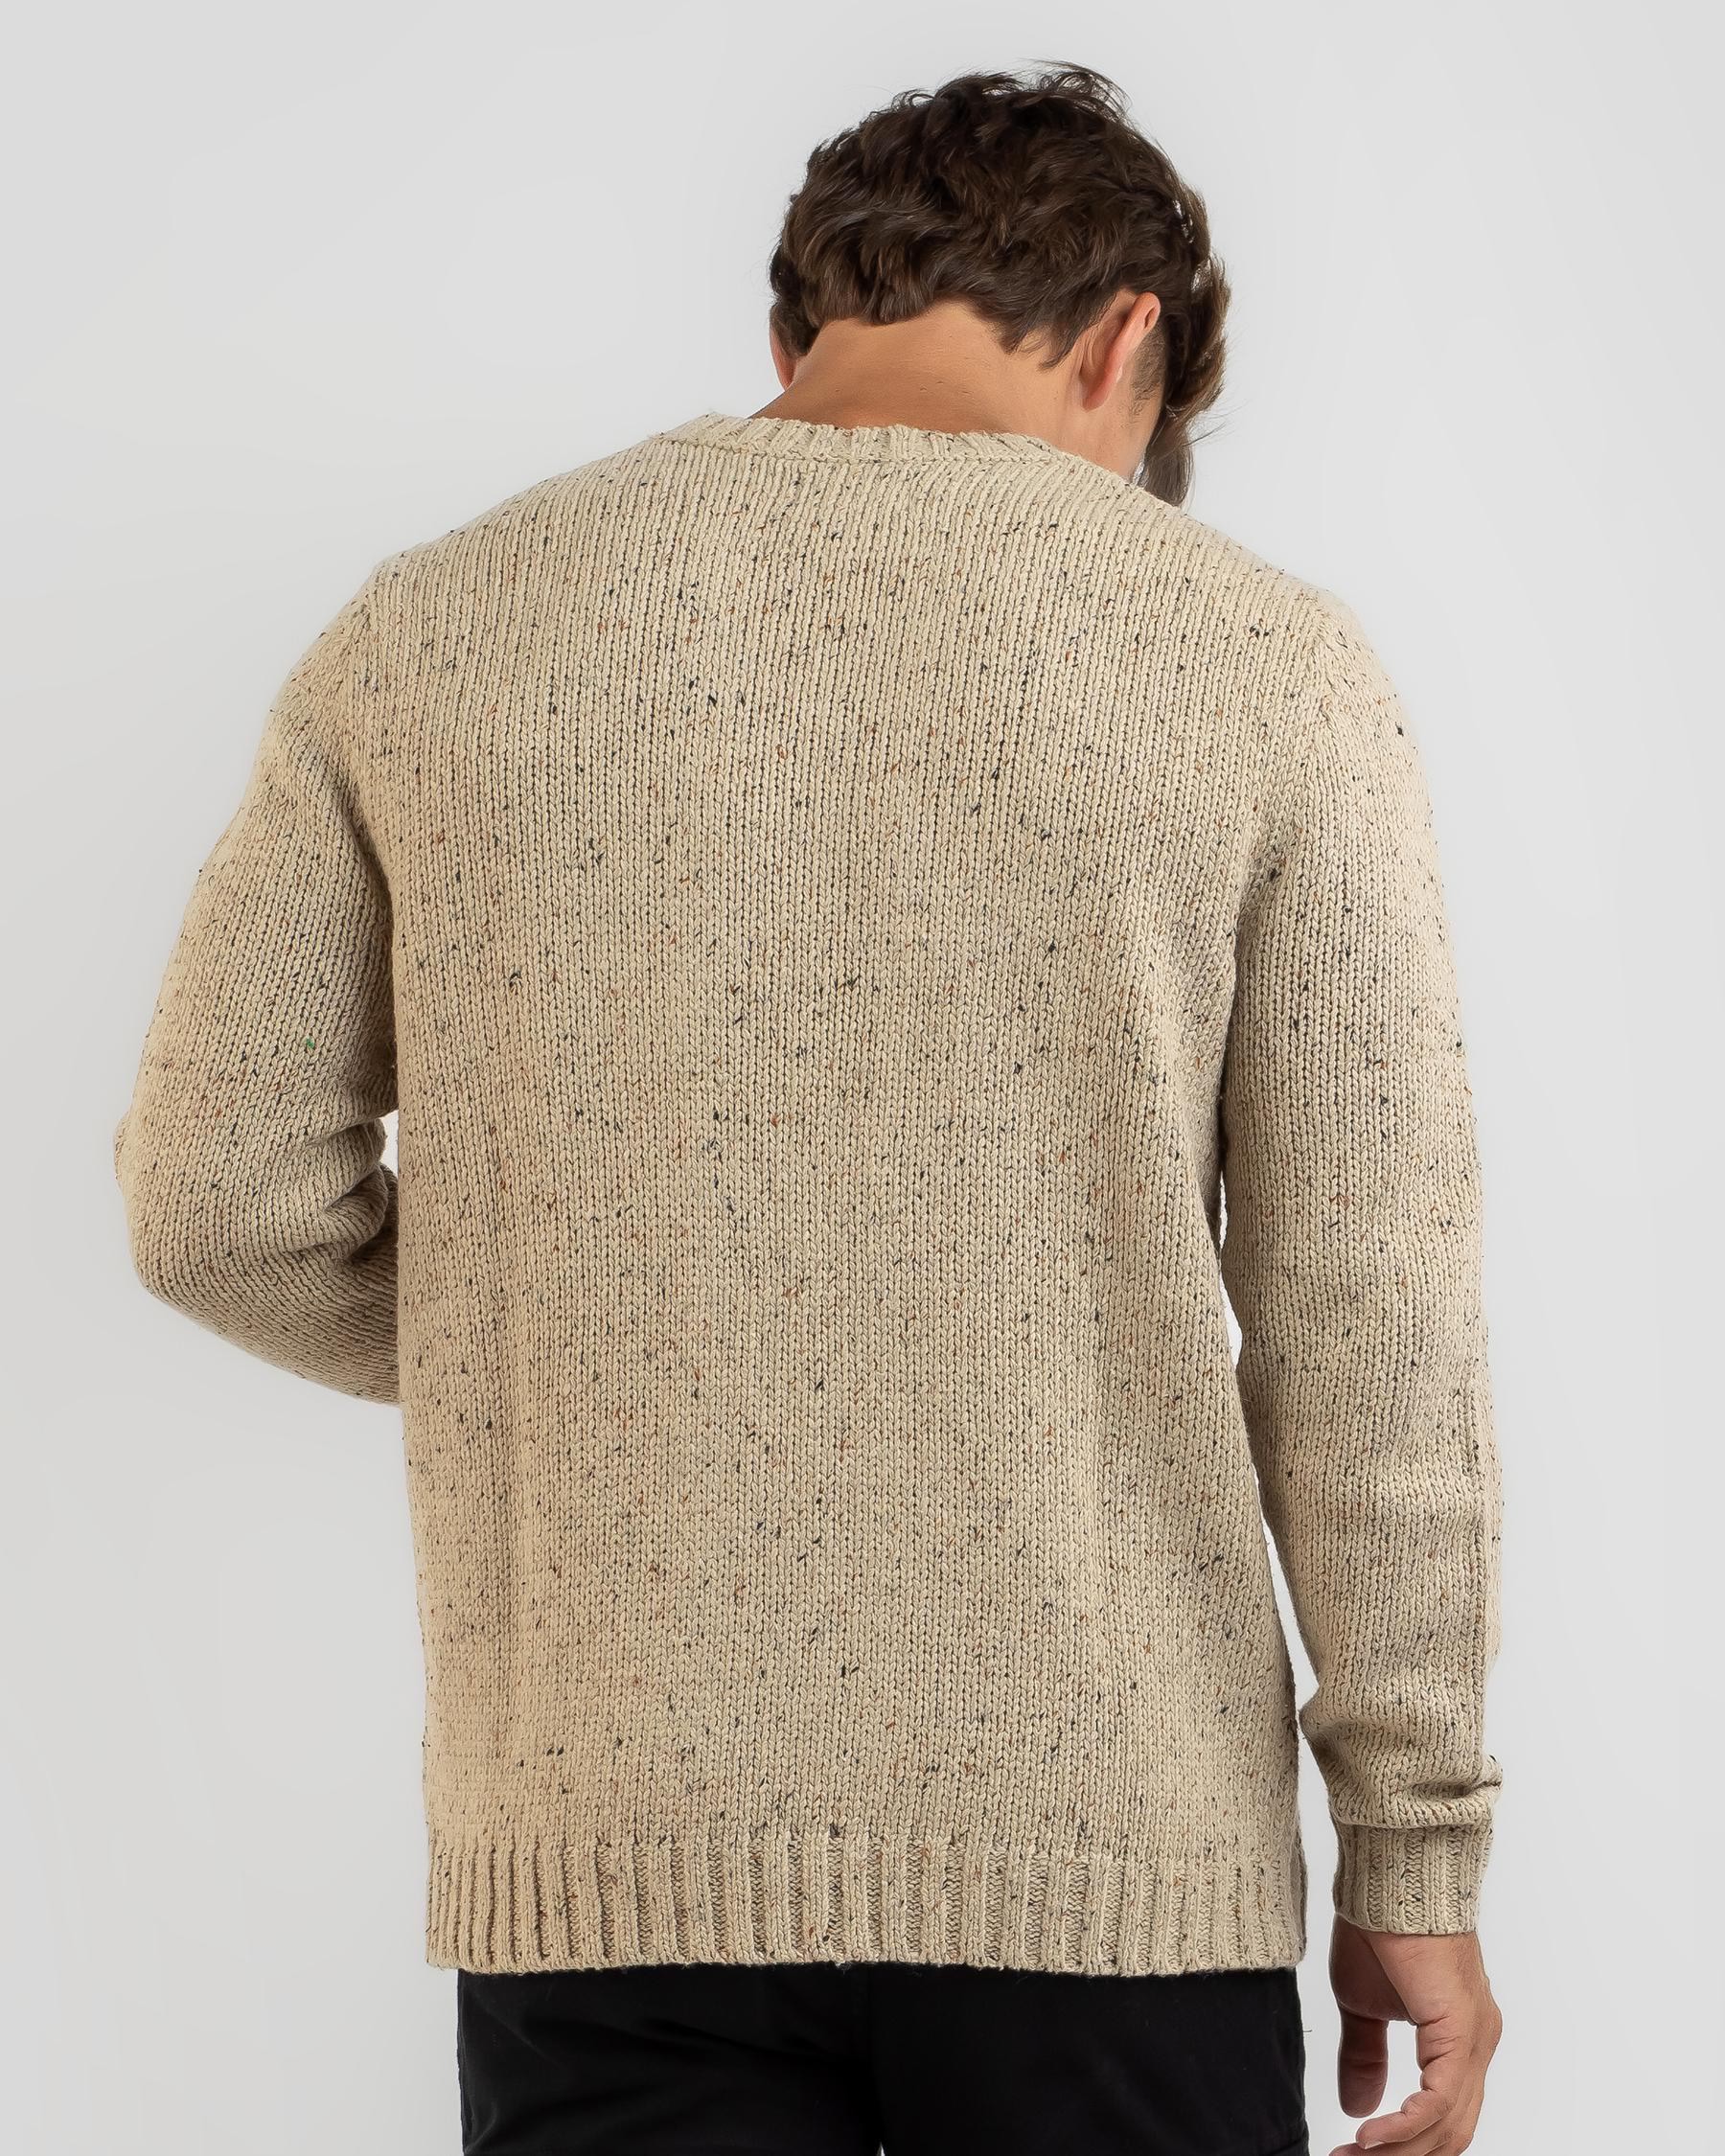 Rusty Magnuson Crew Neck Knit In Sable - Fast Shipping & Easy Returns ...